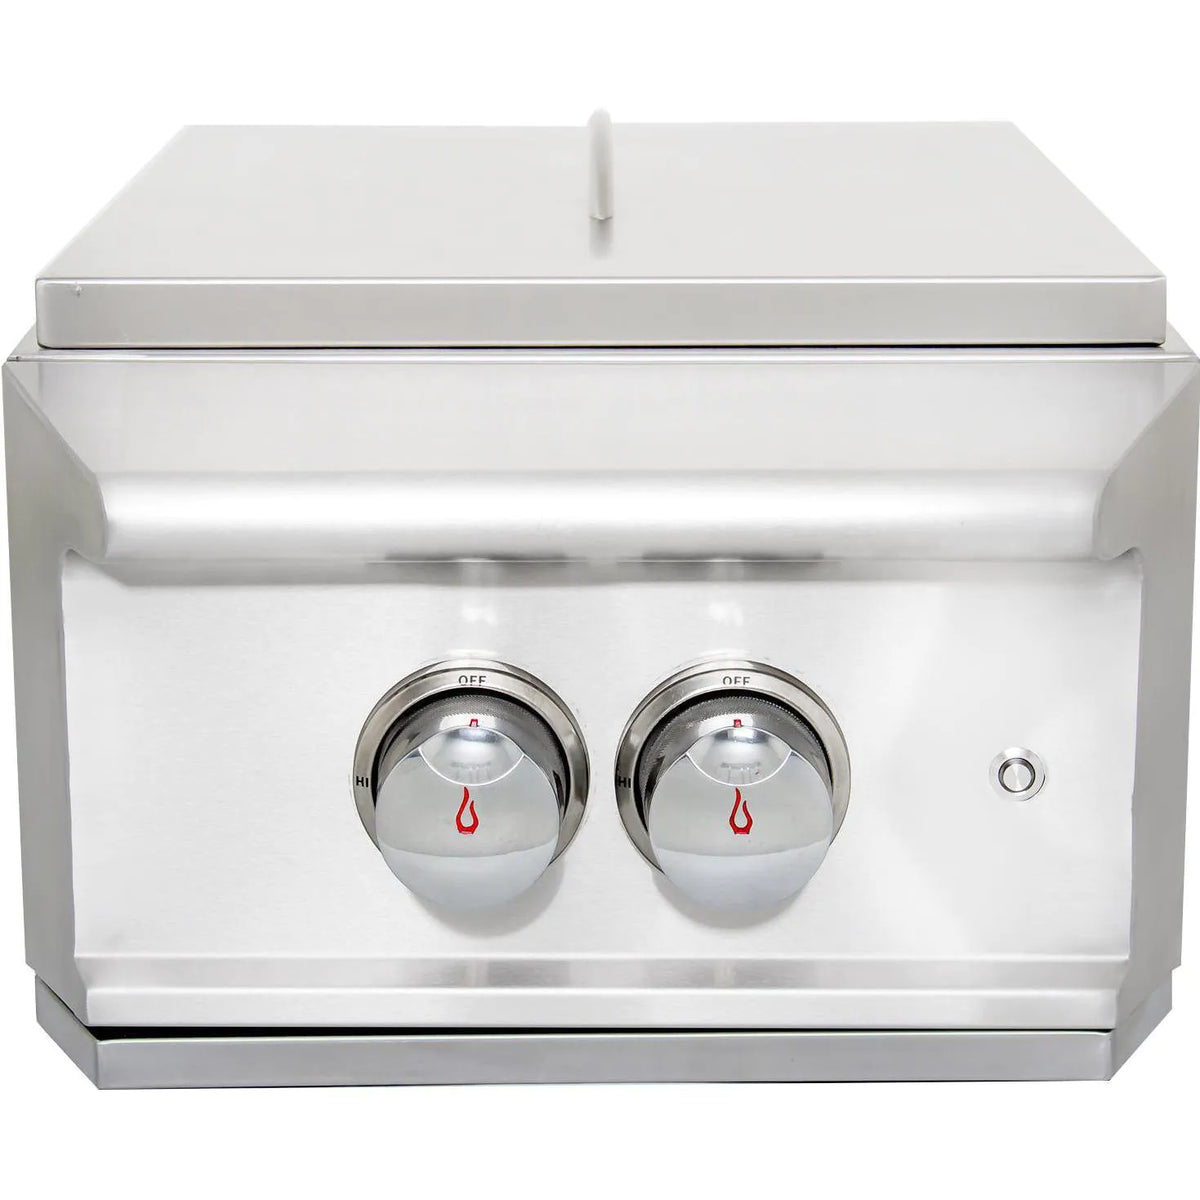 Blaze Professional 16 Inch Power Burner Front View With Stainless Steel Lid